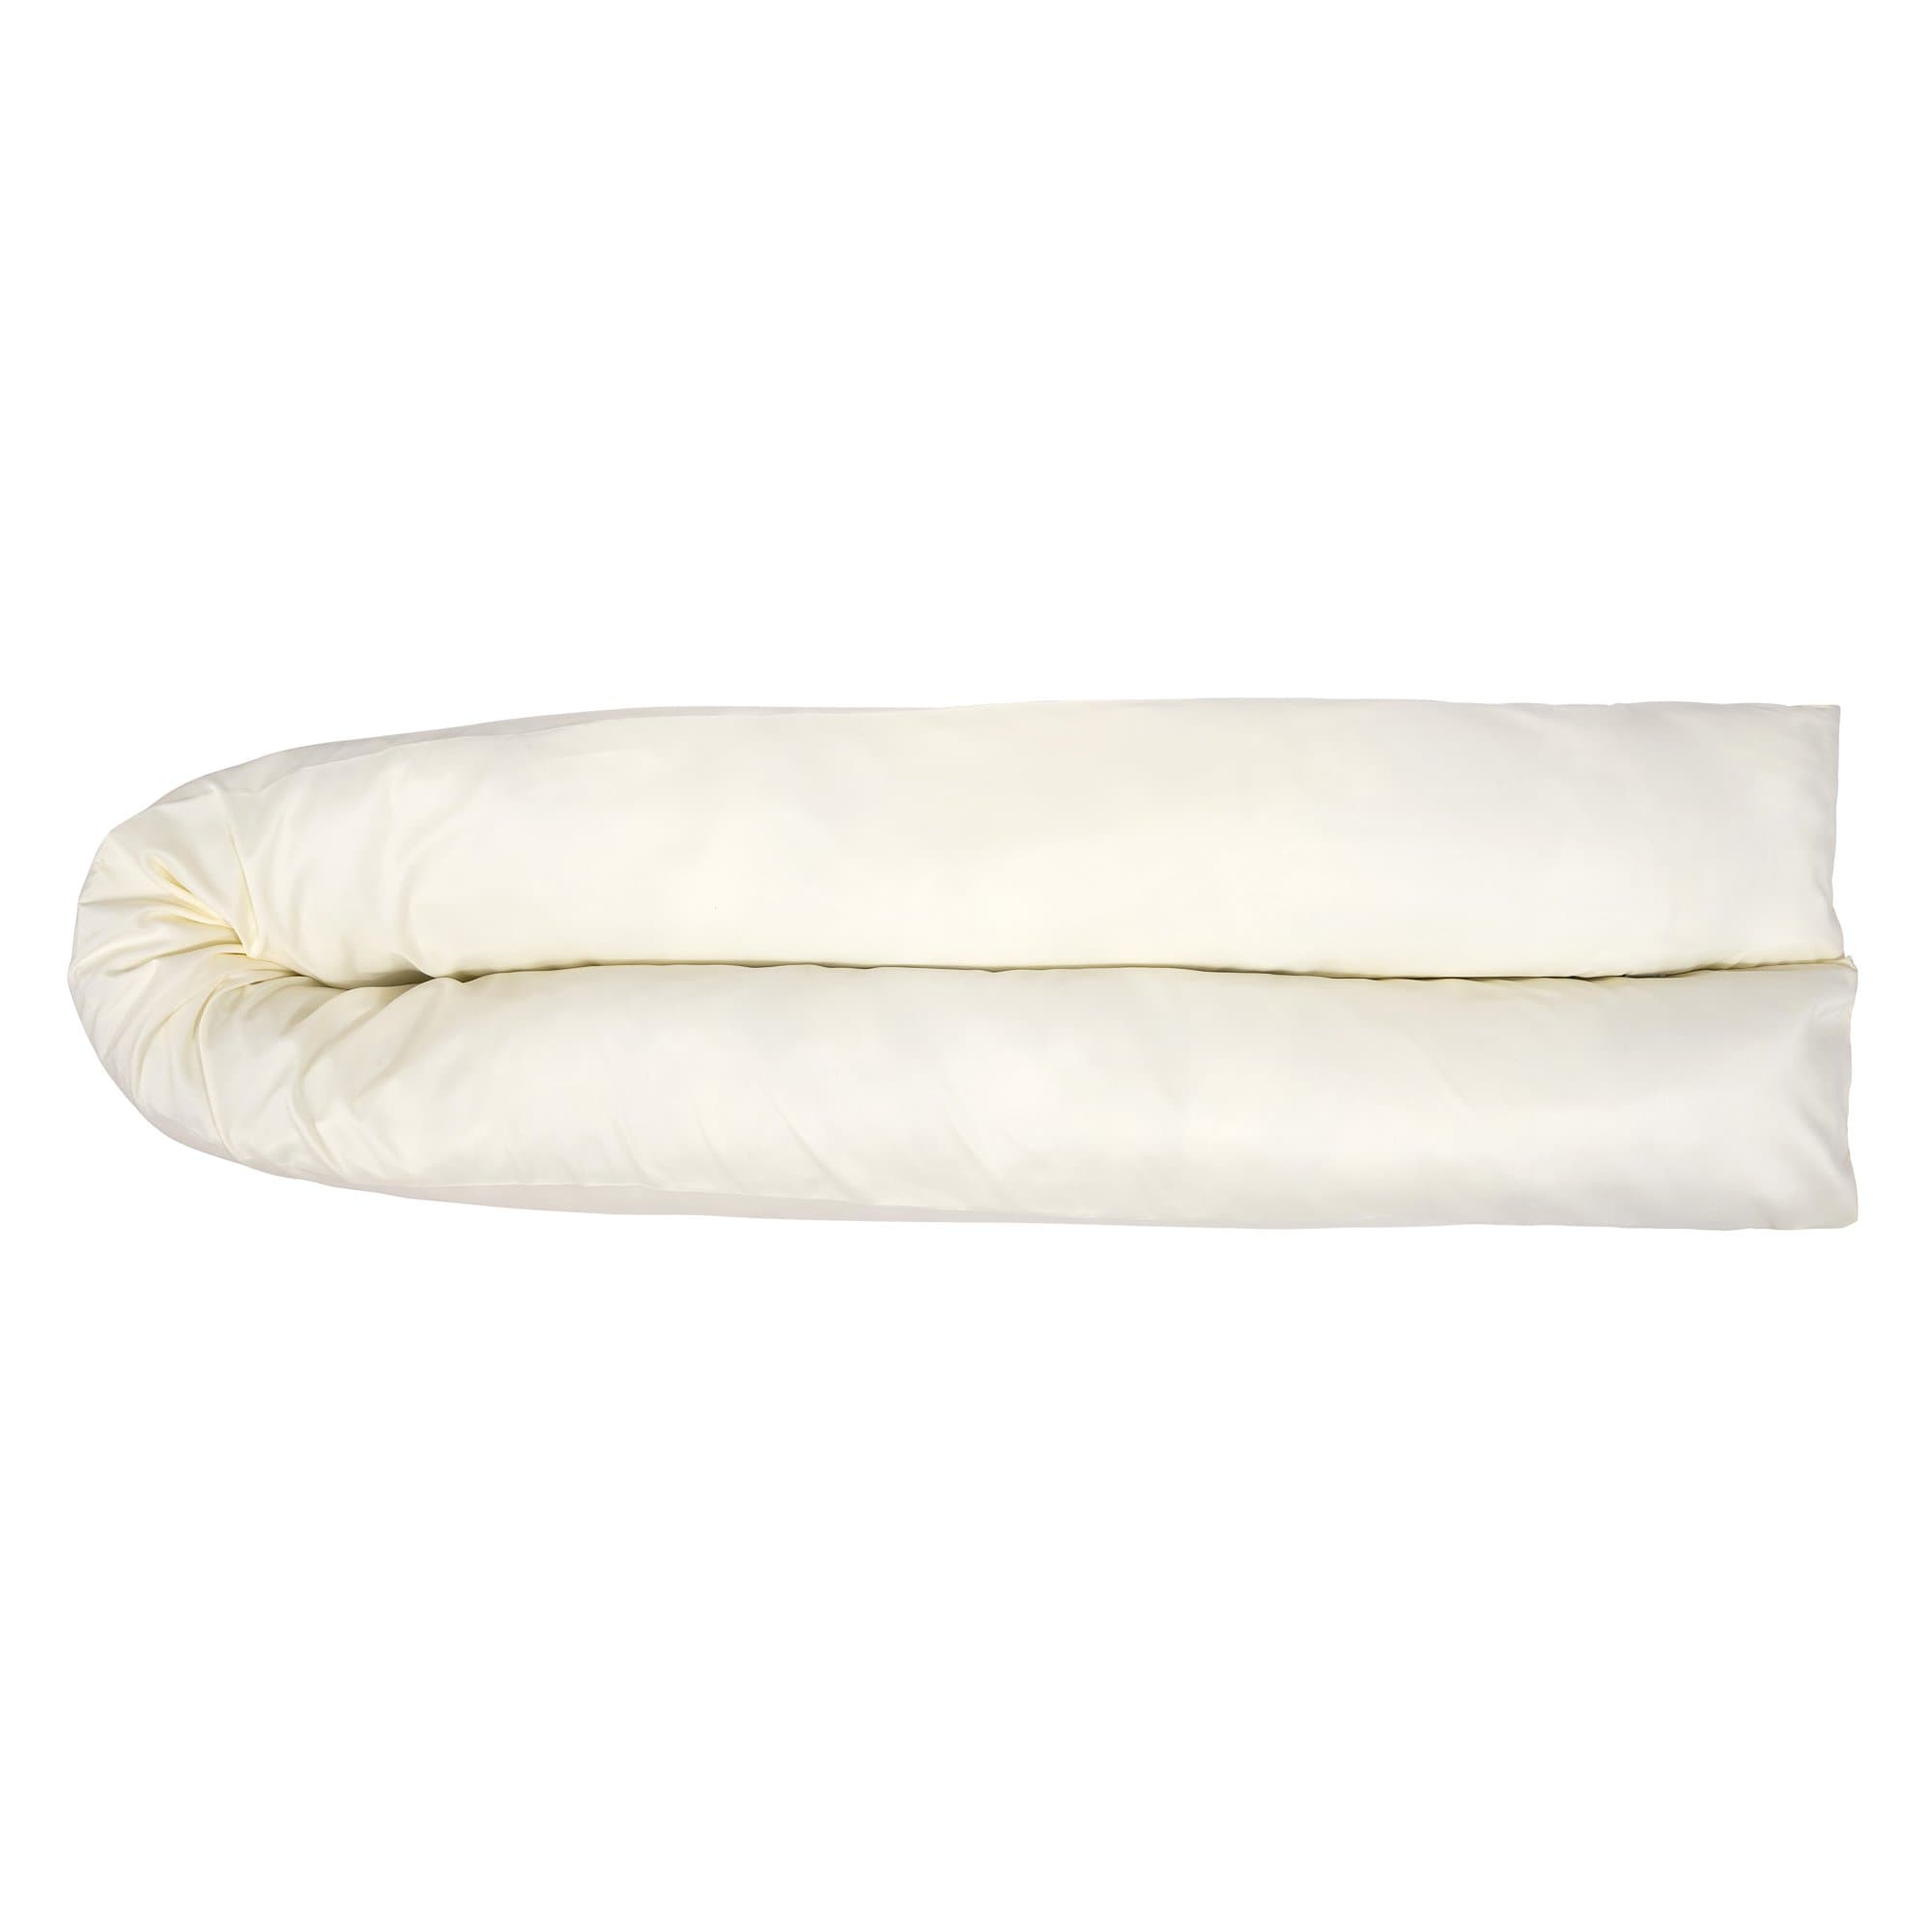 6 Ft Maternity Pillow And Case - Cream - For Your Little One